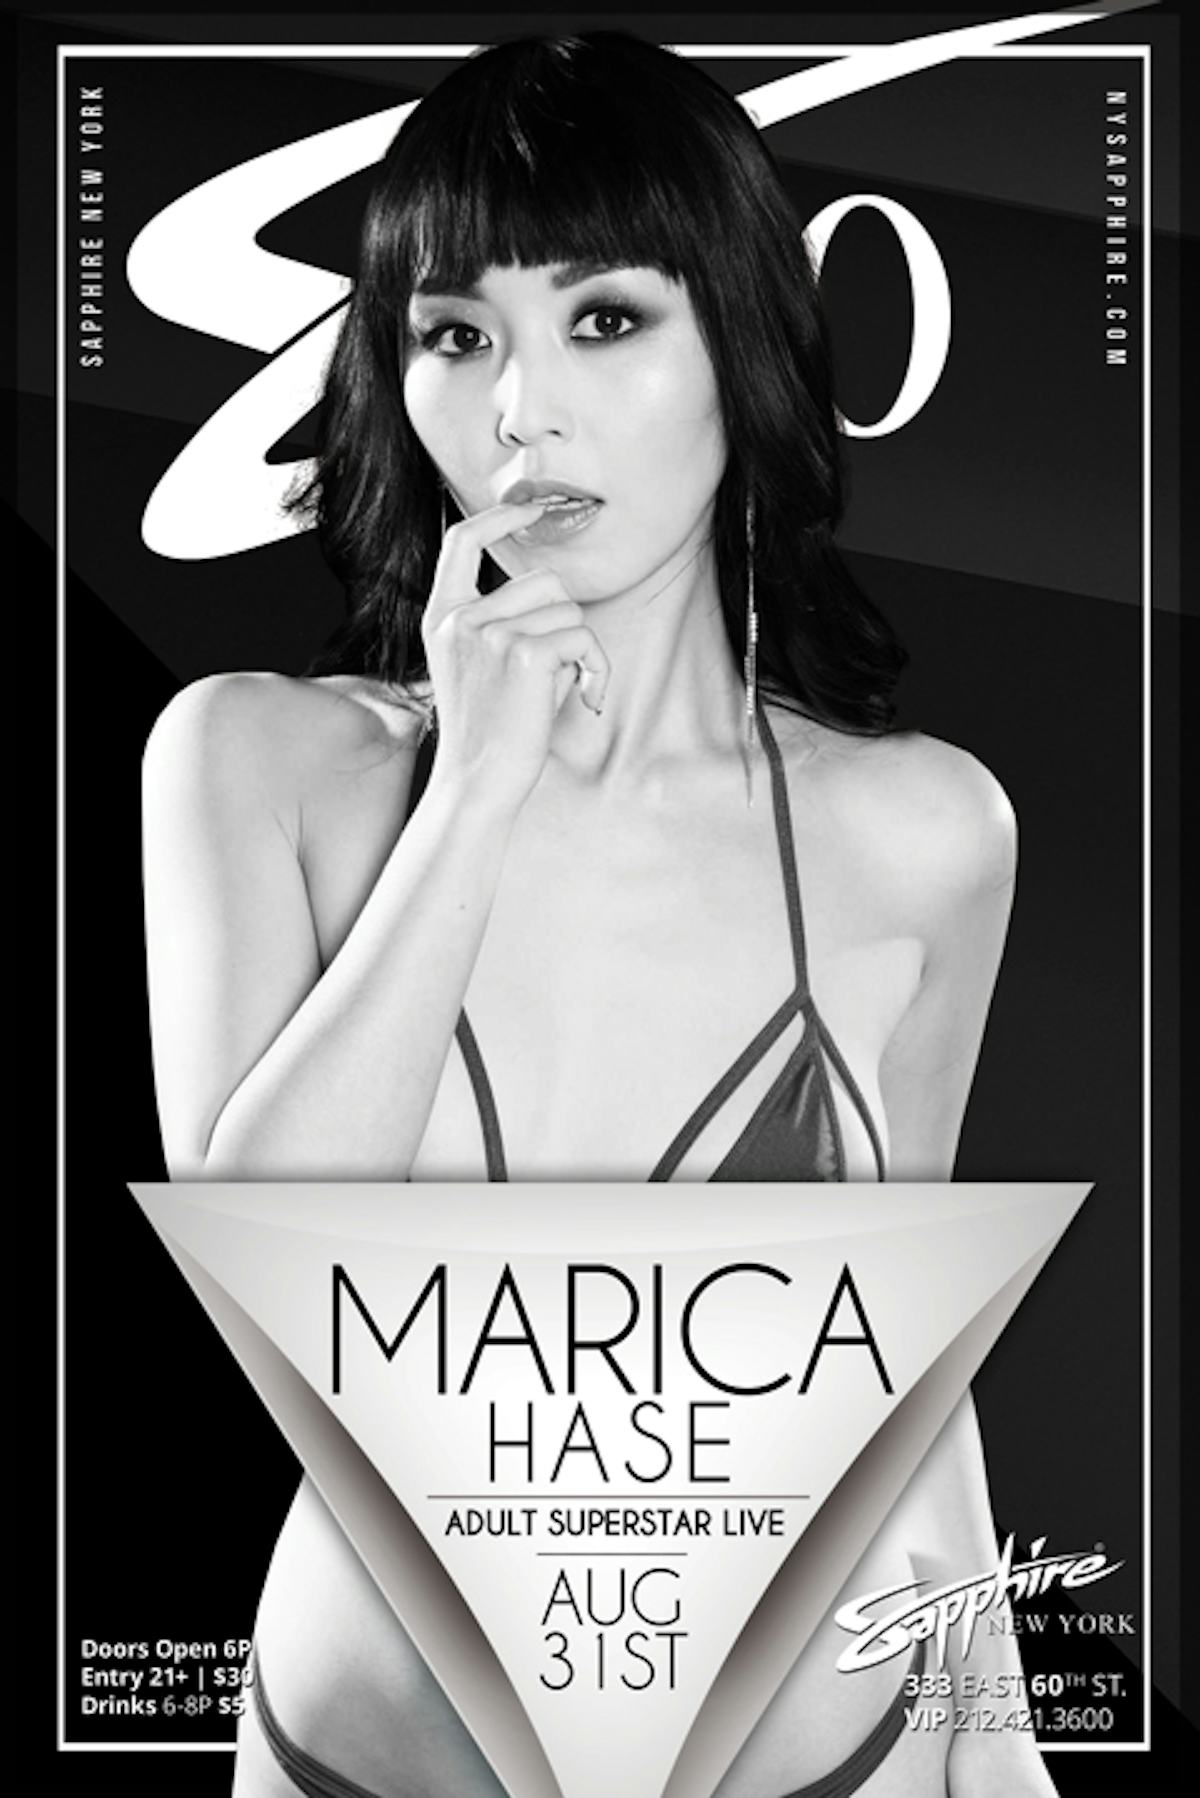 Buy tickets, tables and packages at Marica Hase Friday 8.31.18! at Sapphire...